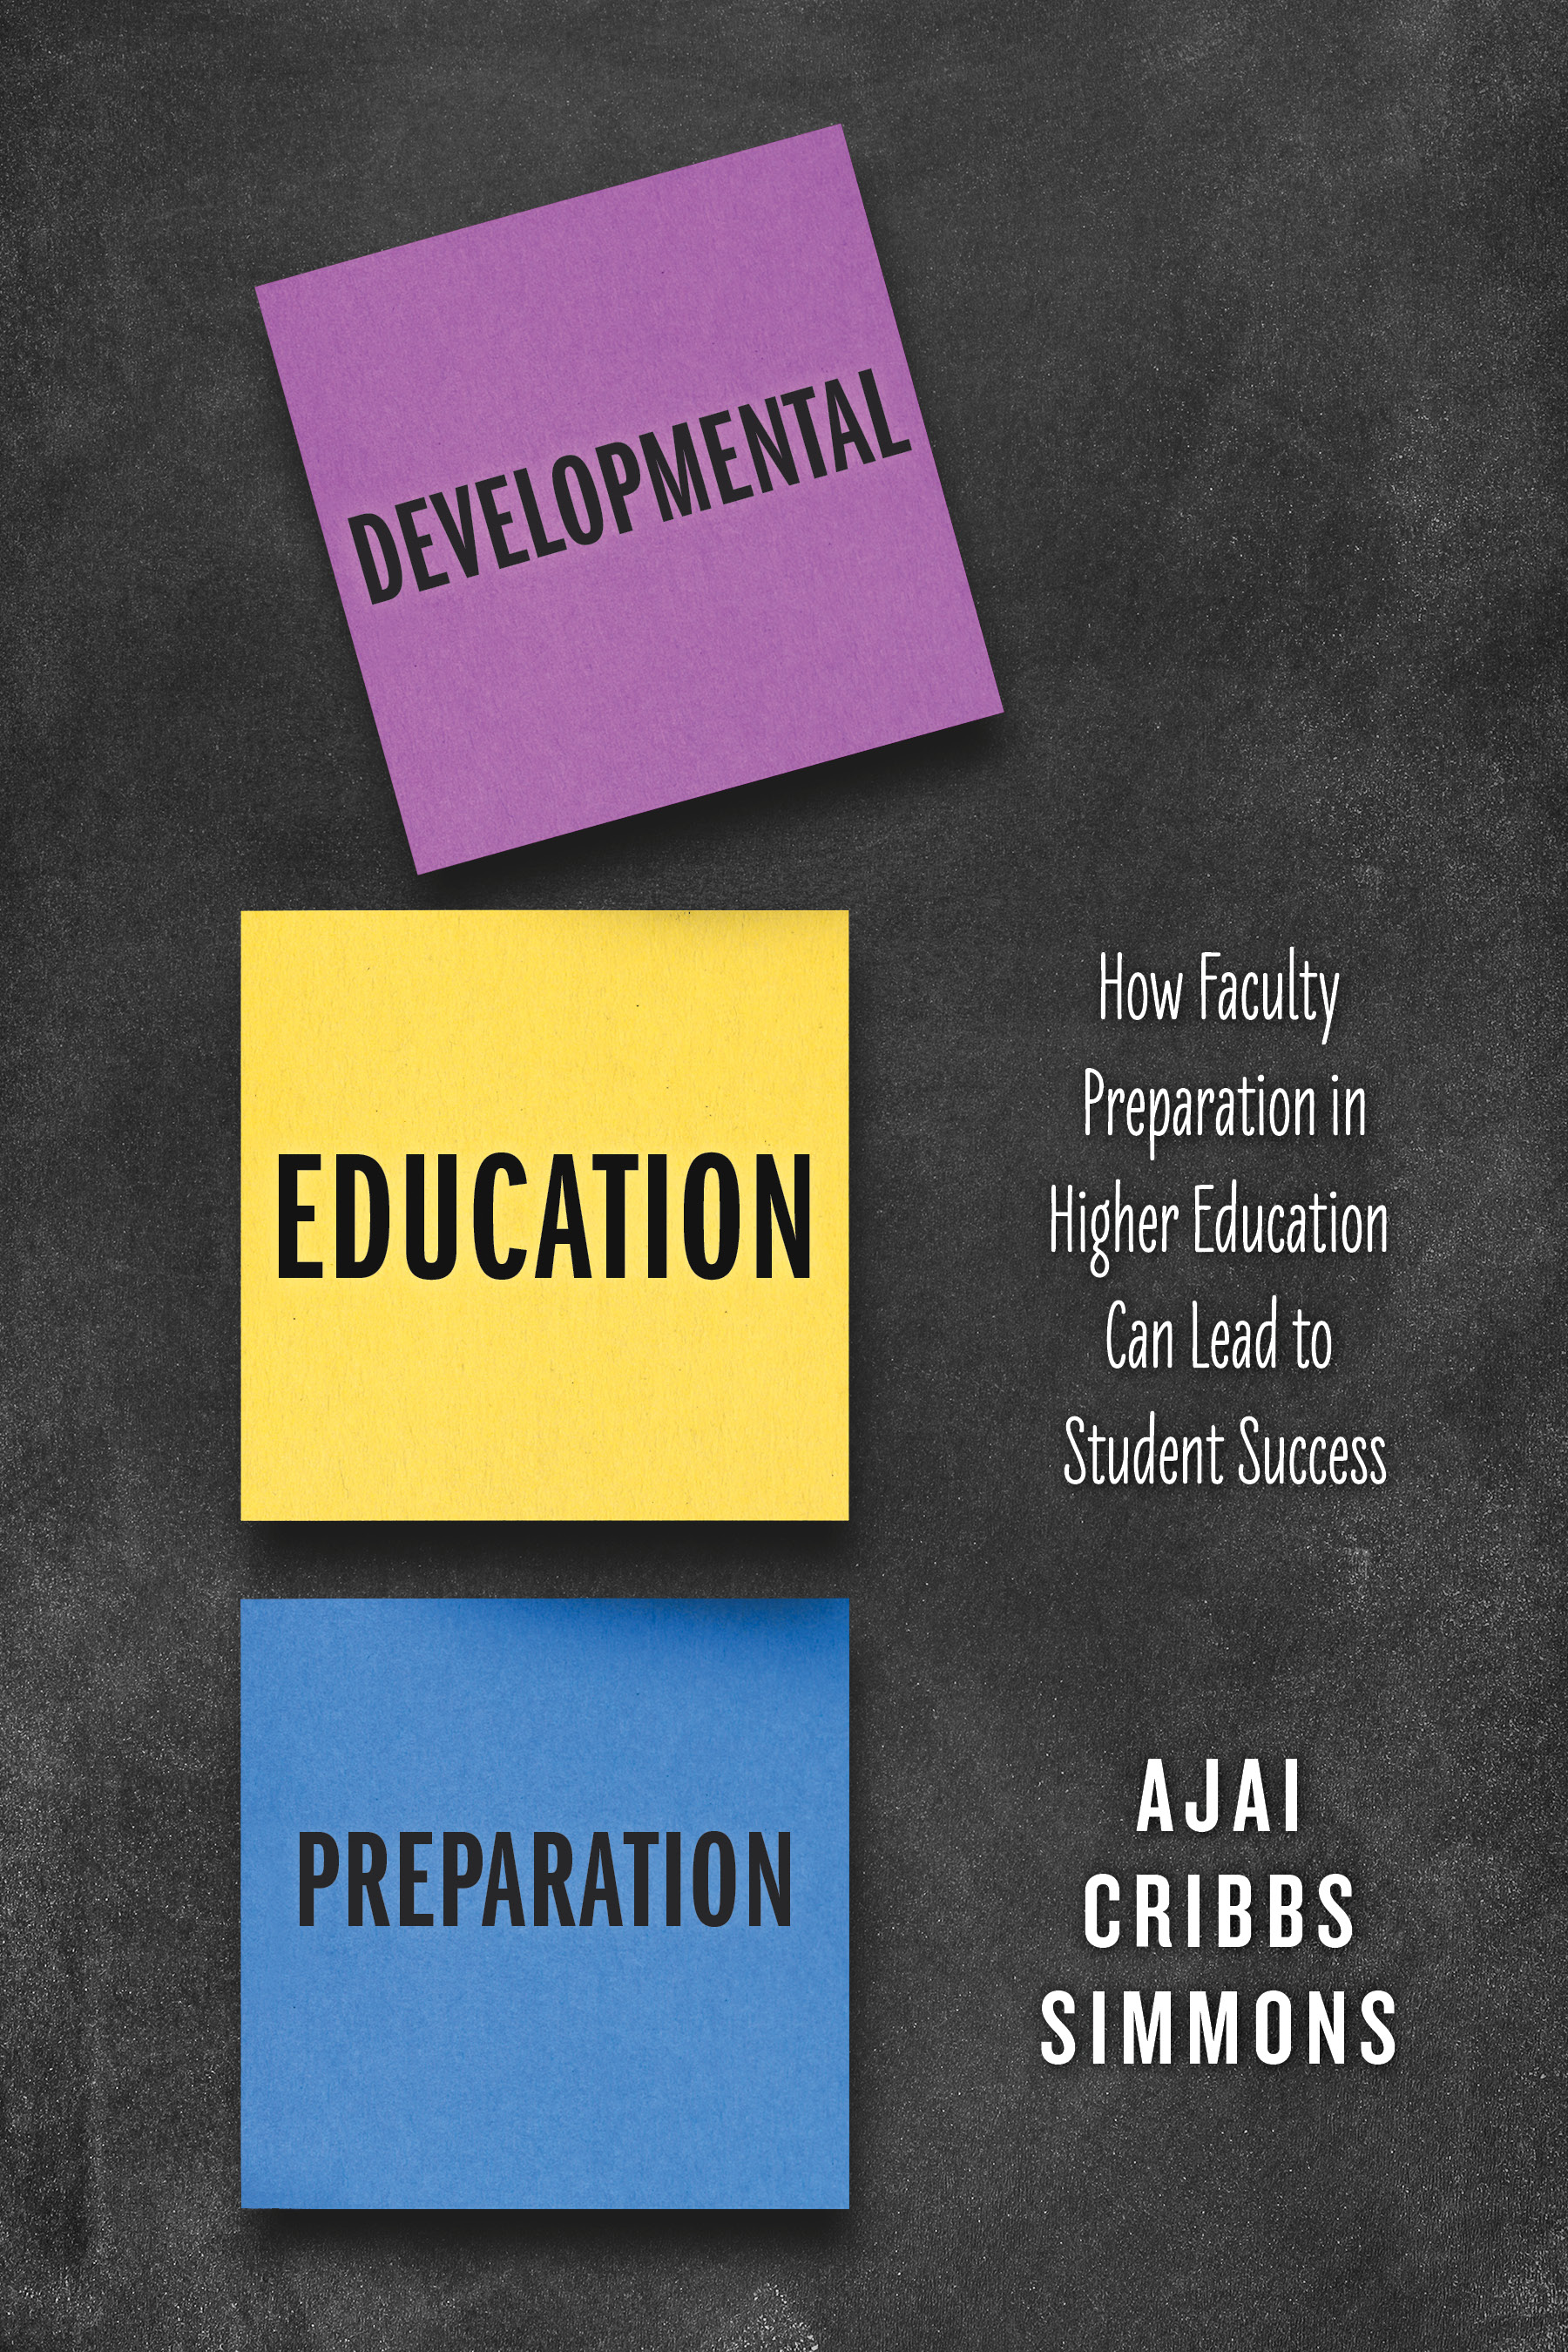 Developmental Education Preparation: How Faculty Preparation in Higher Education Can Lead to Student Success